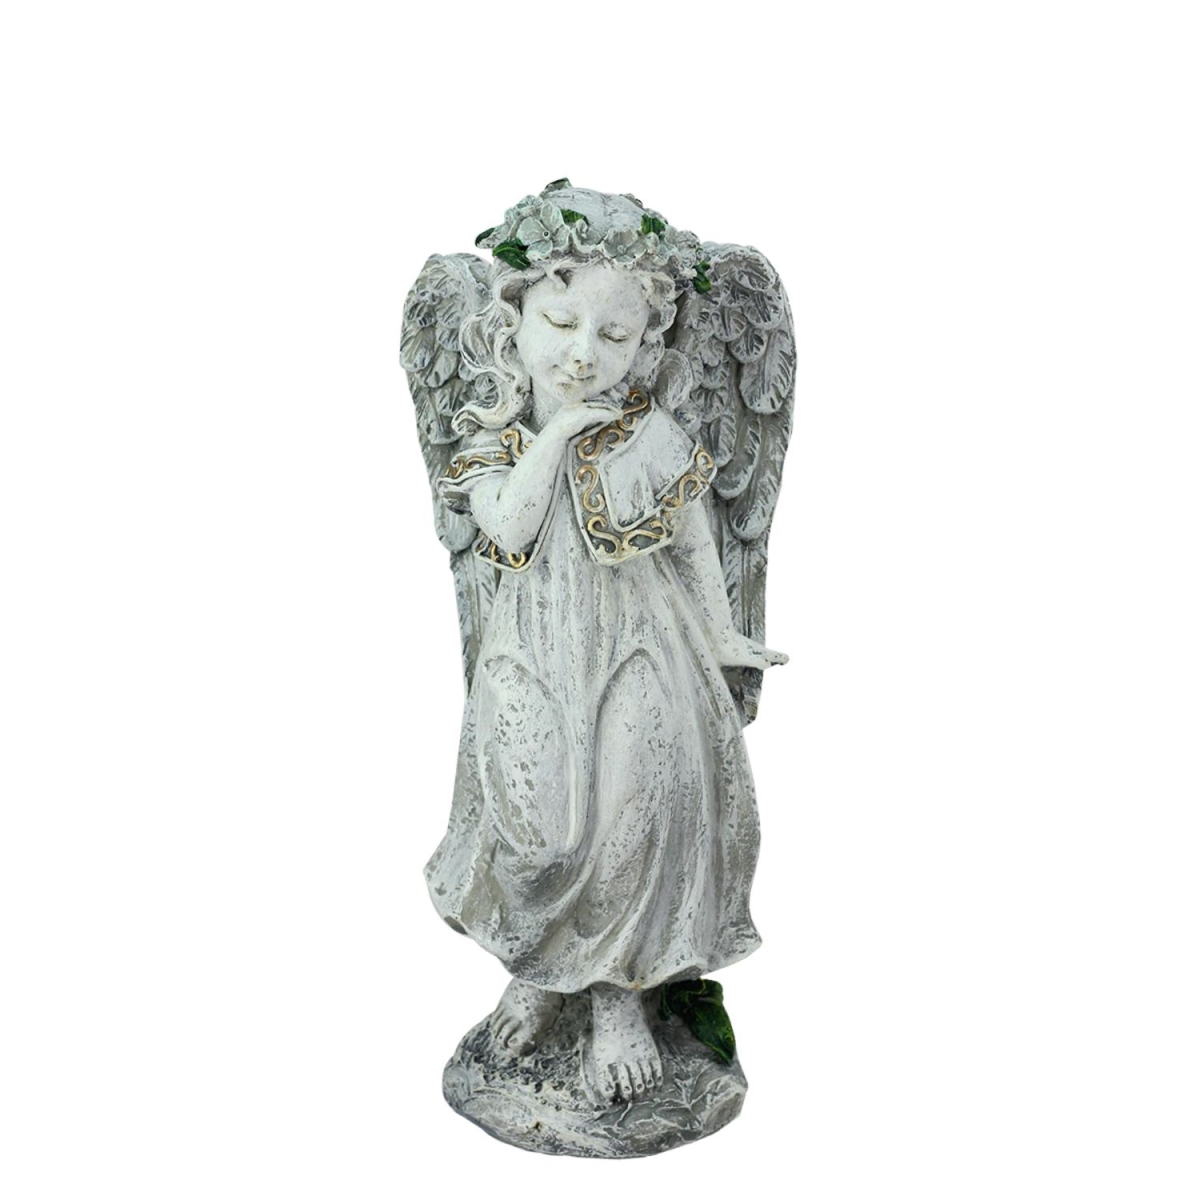 32038417 10.25 In. Heavenly Gardens Distressed Gray Angel Girl With Floral Crown Outdoor Patio Garden Statue